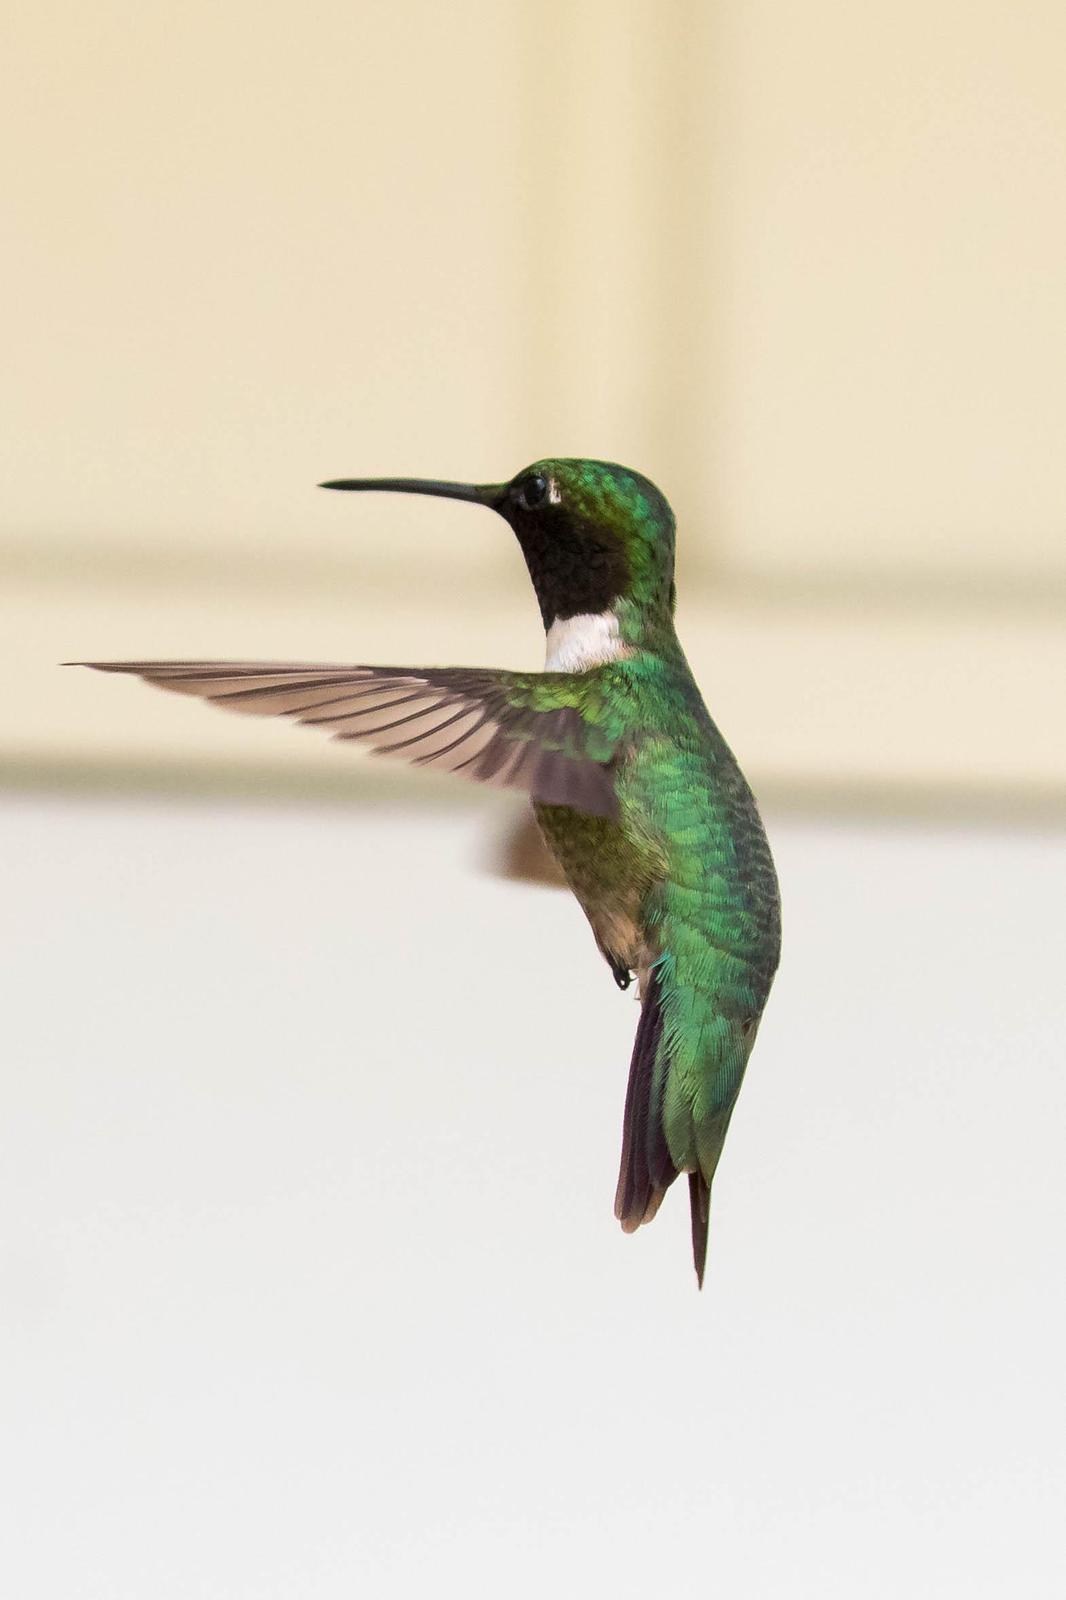 Ruby-throated Hummingbird Photo by Terry Campbell